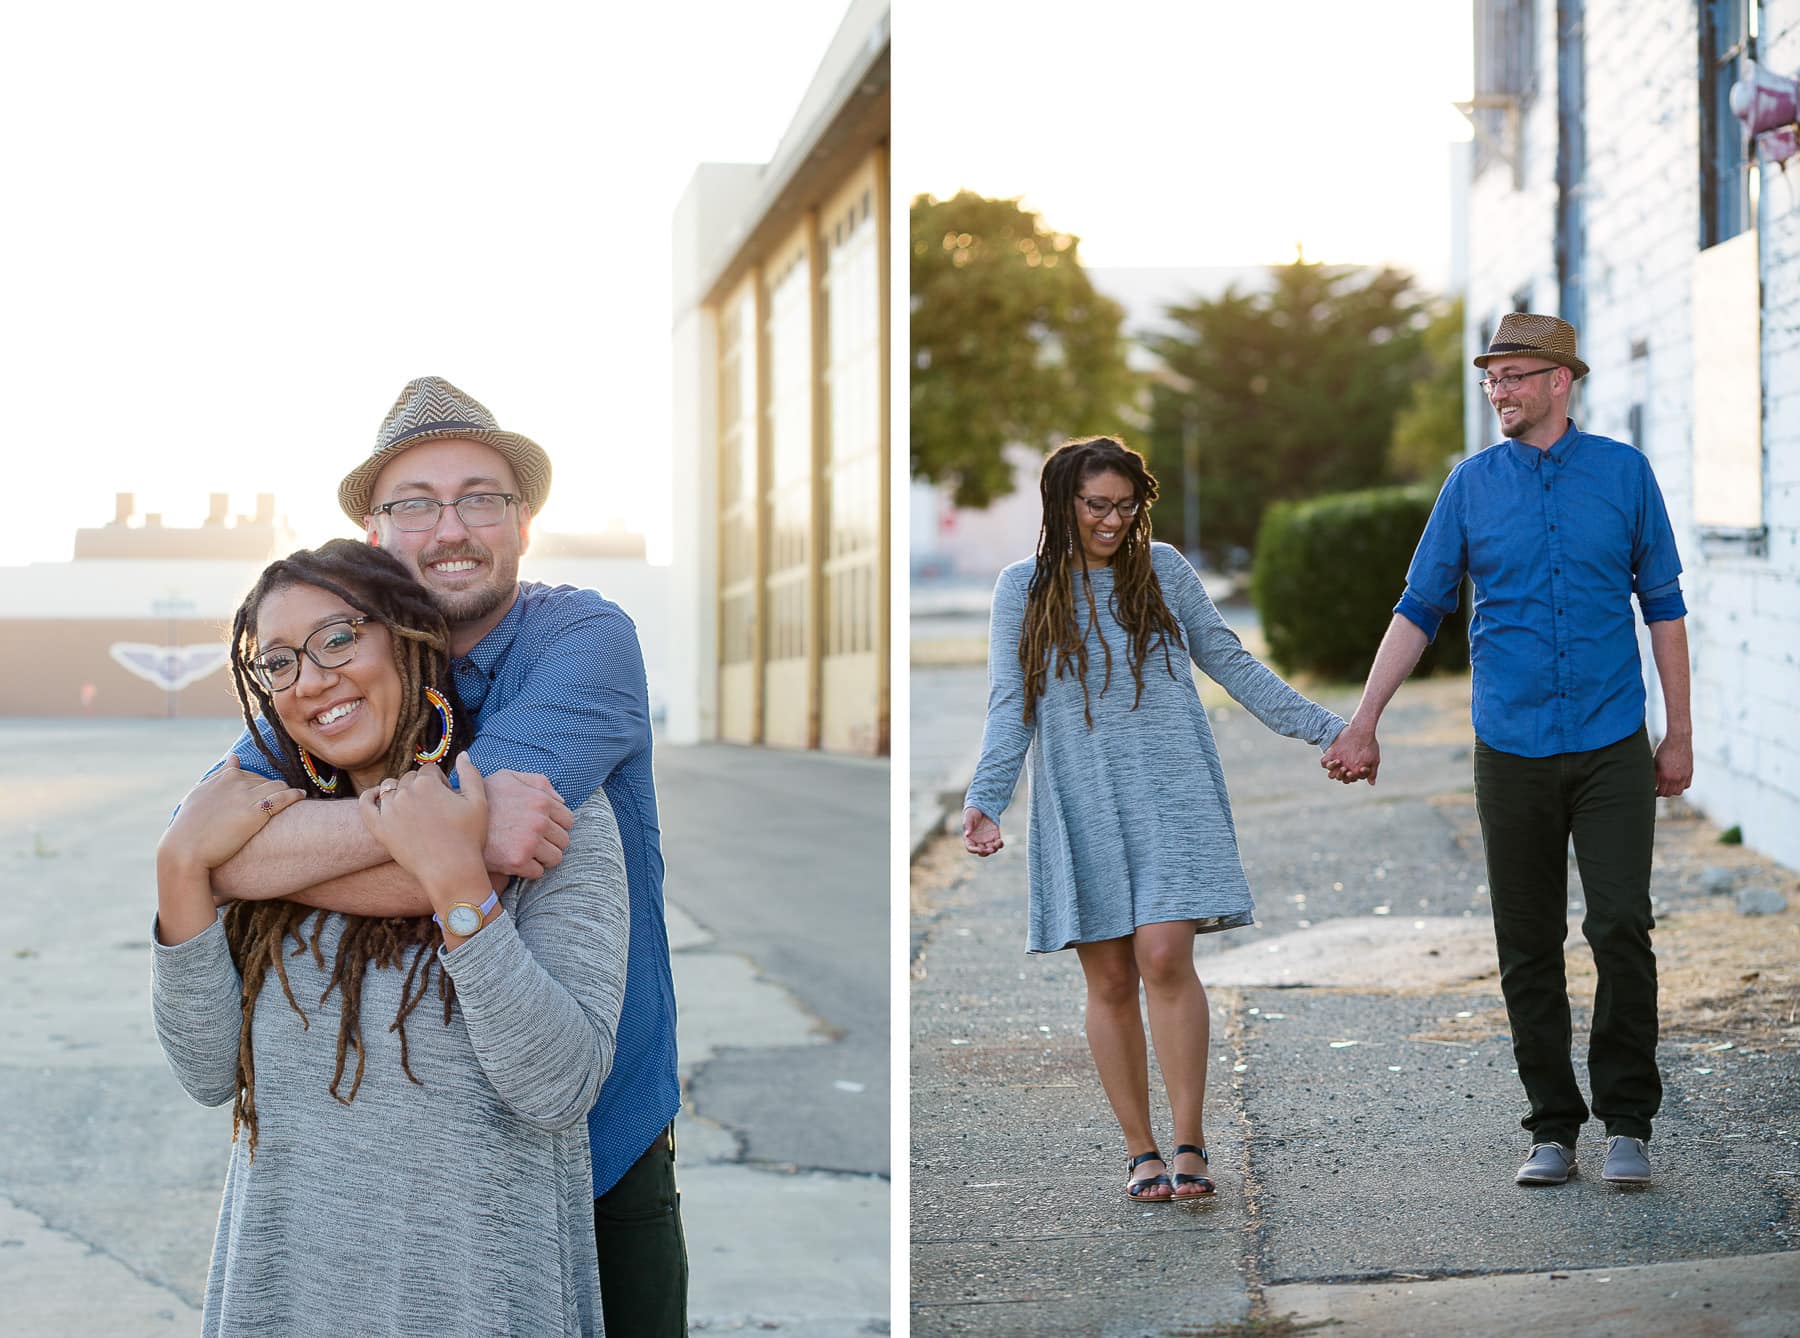 Two images of couple walking and embracing on the street at sunset